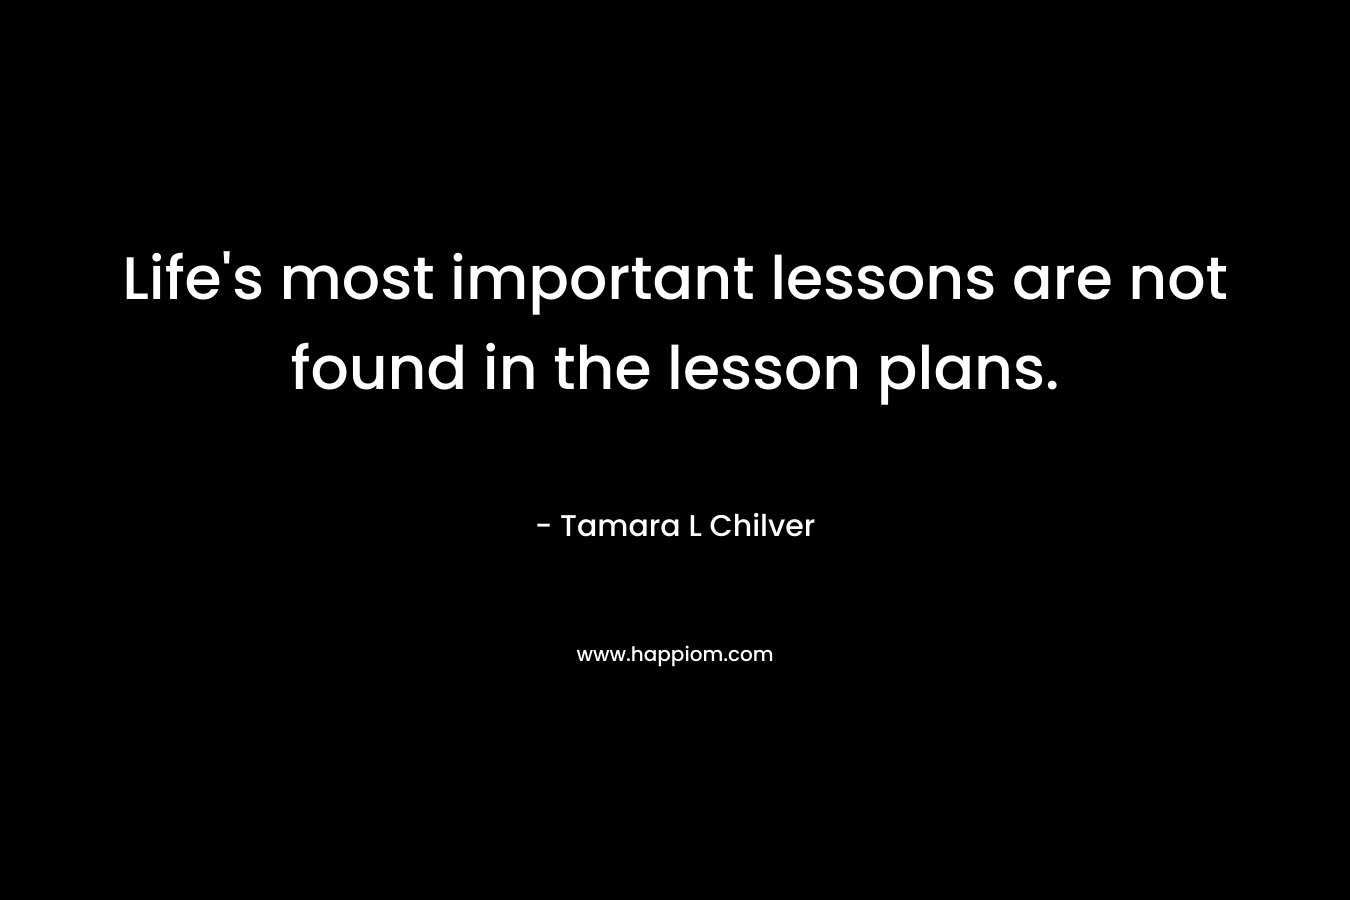 Life's most important lessons are not found in the lesson plans.